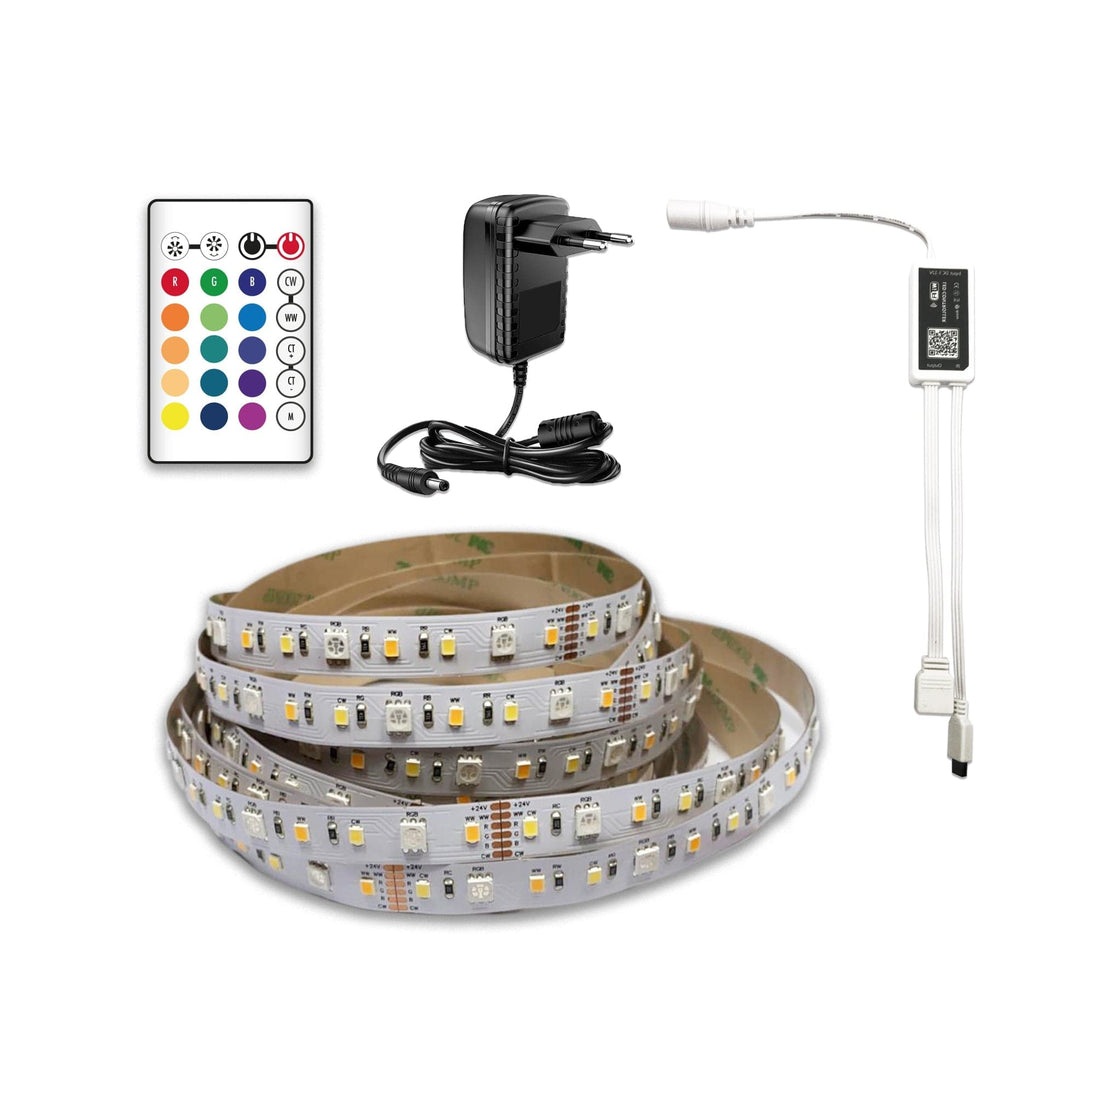 LED STRIP KIT 5MT 24W RGB CCT WITH WI-FI CONTROLLER AND WITH REMOTE CONTROL IP65